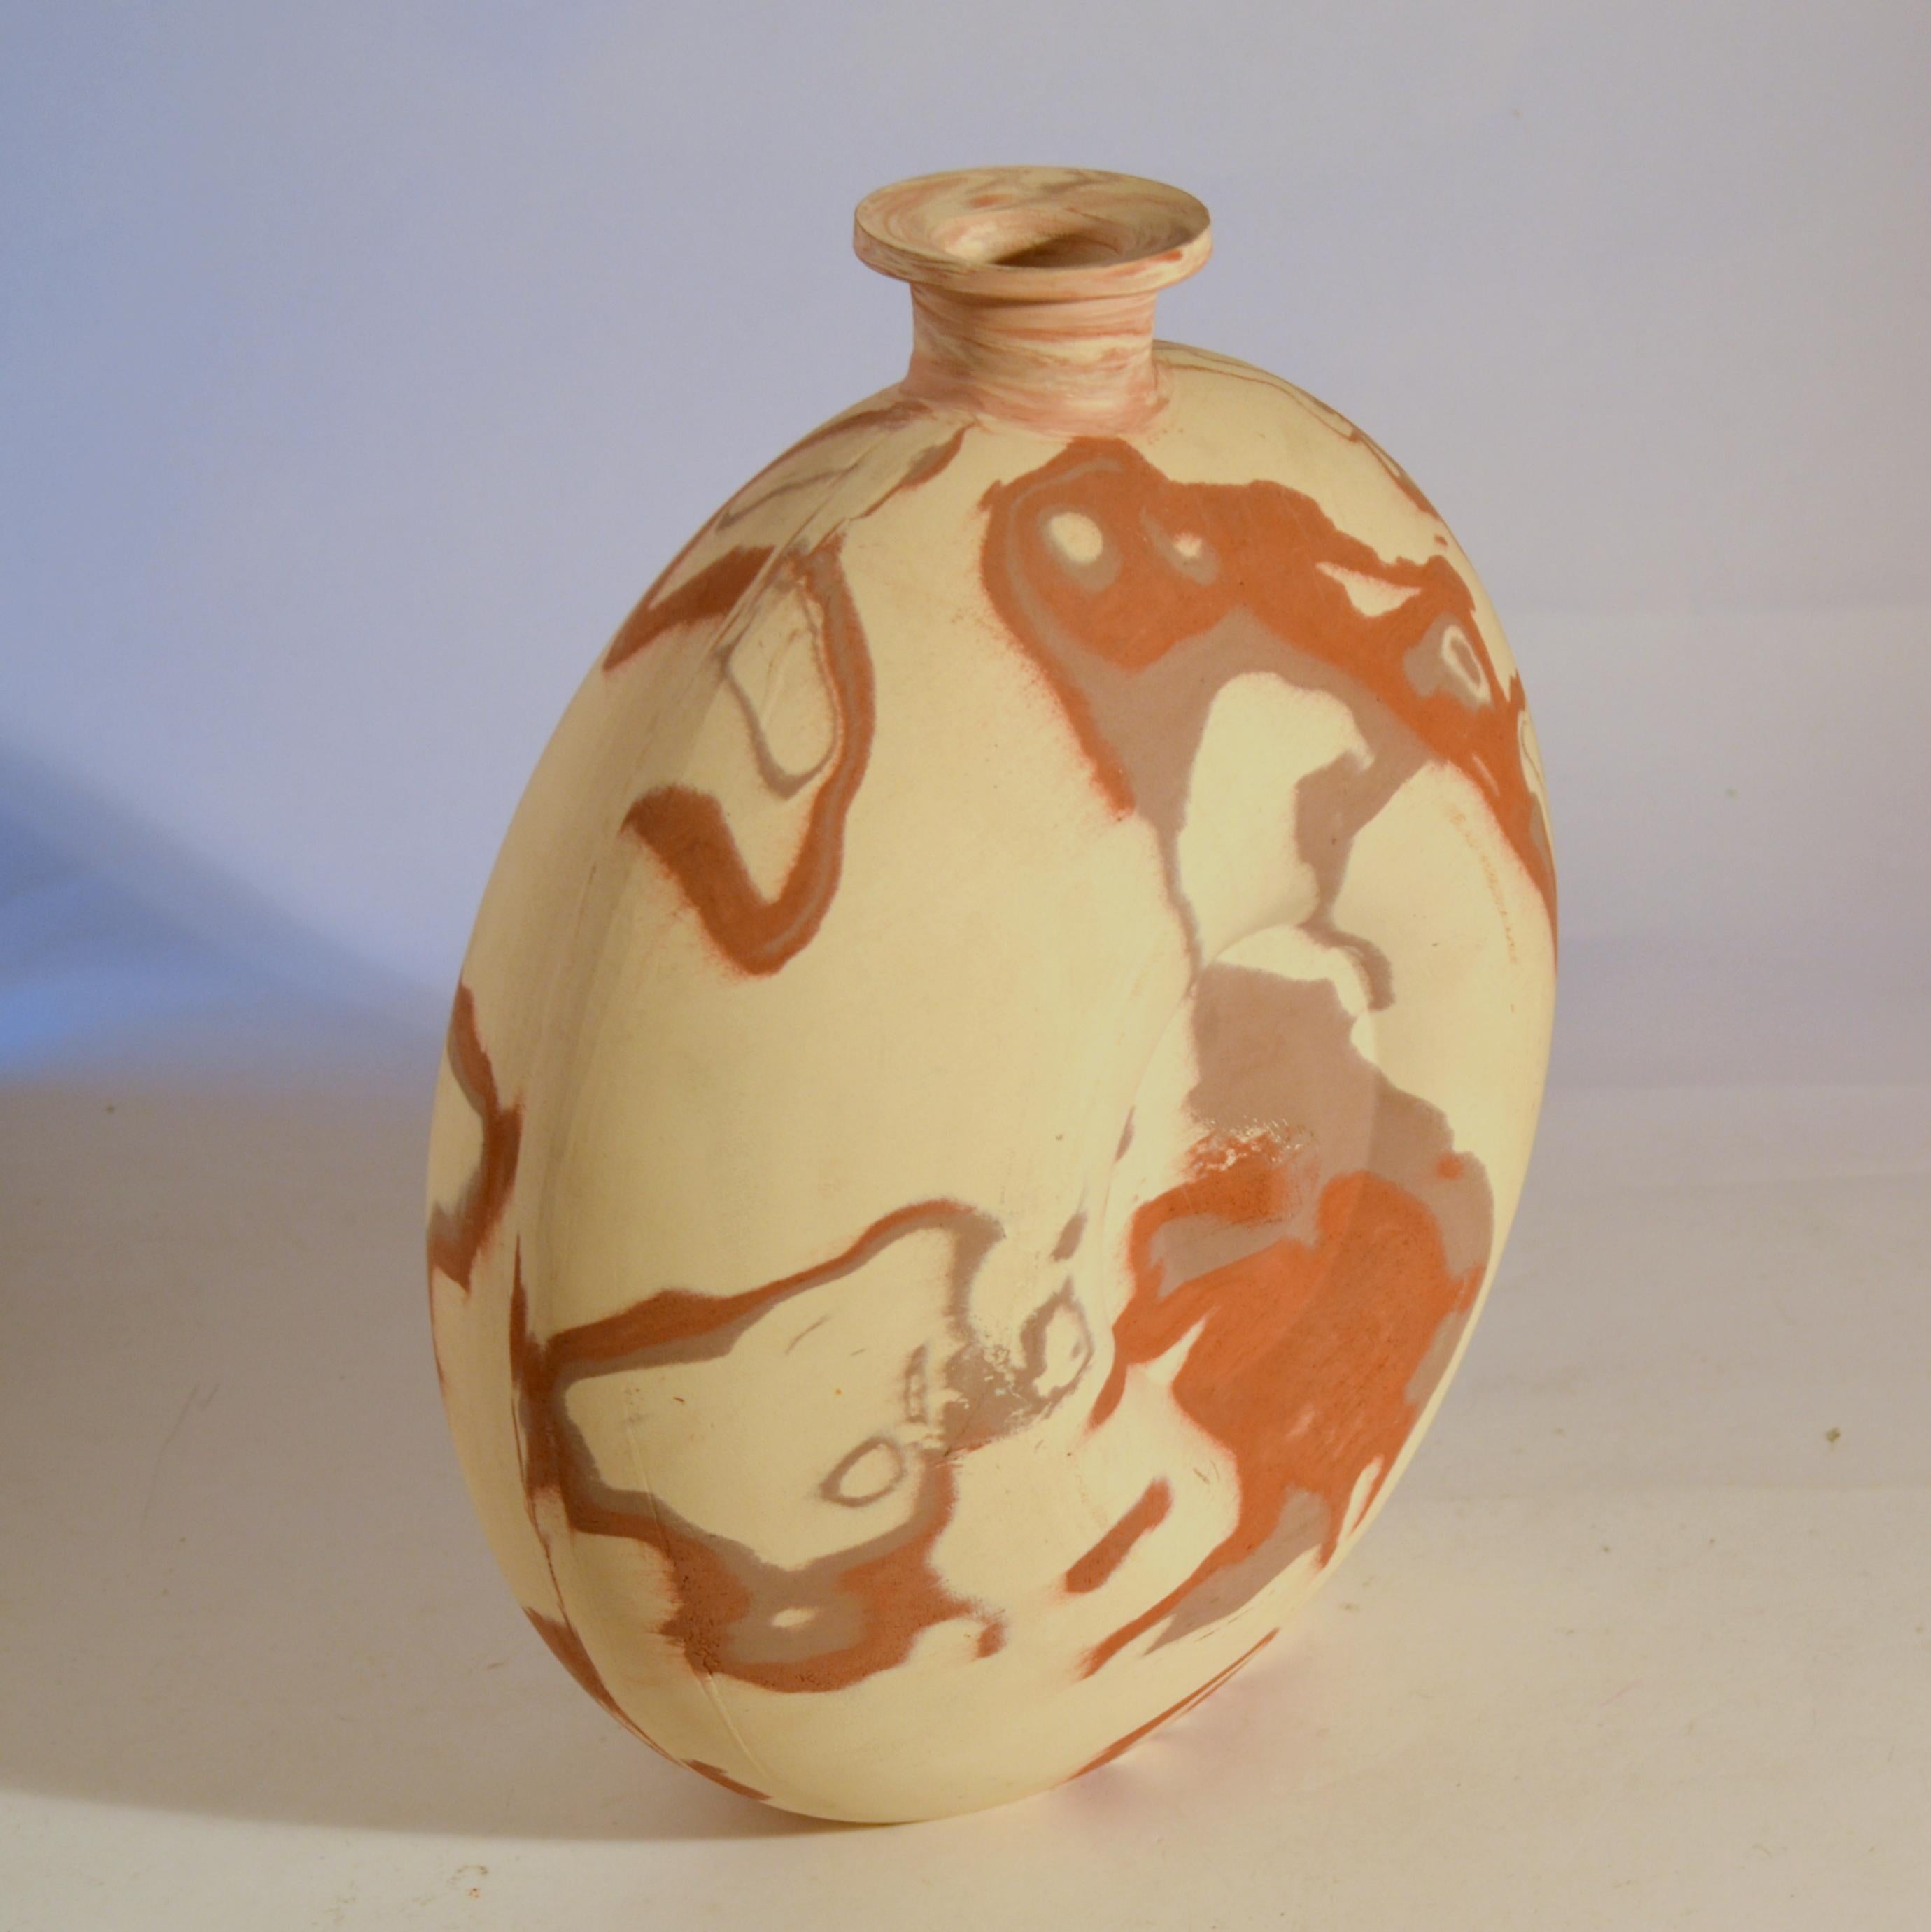 Pair of Large Decorative Studio Pottery Vases Marbled in Earth Tones  In Excellent Condition For Sale In London, GB